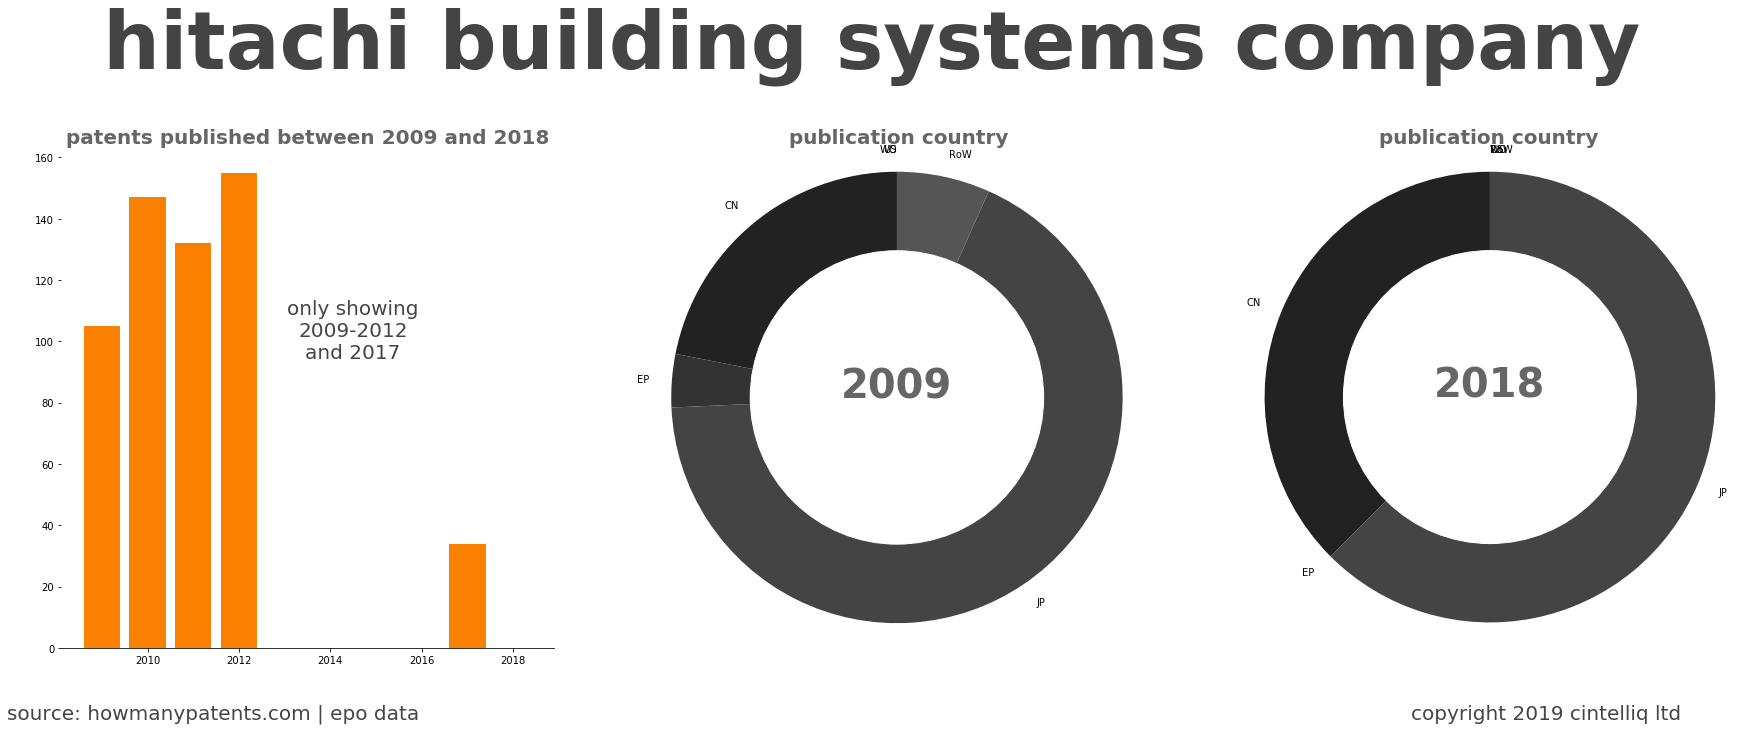 summary of patents for Hitachi Building Systems Company